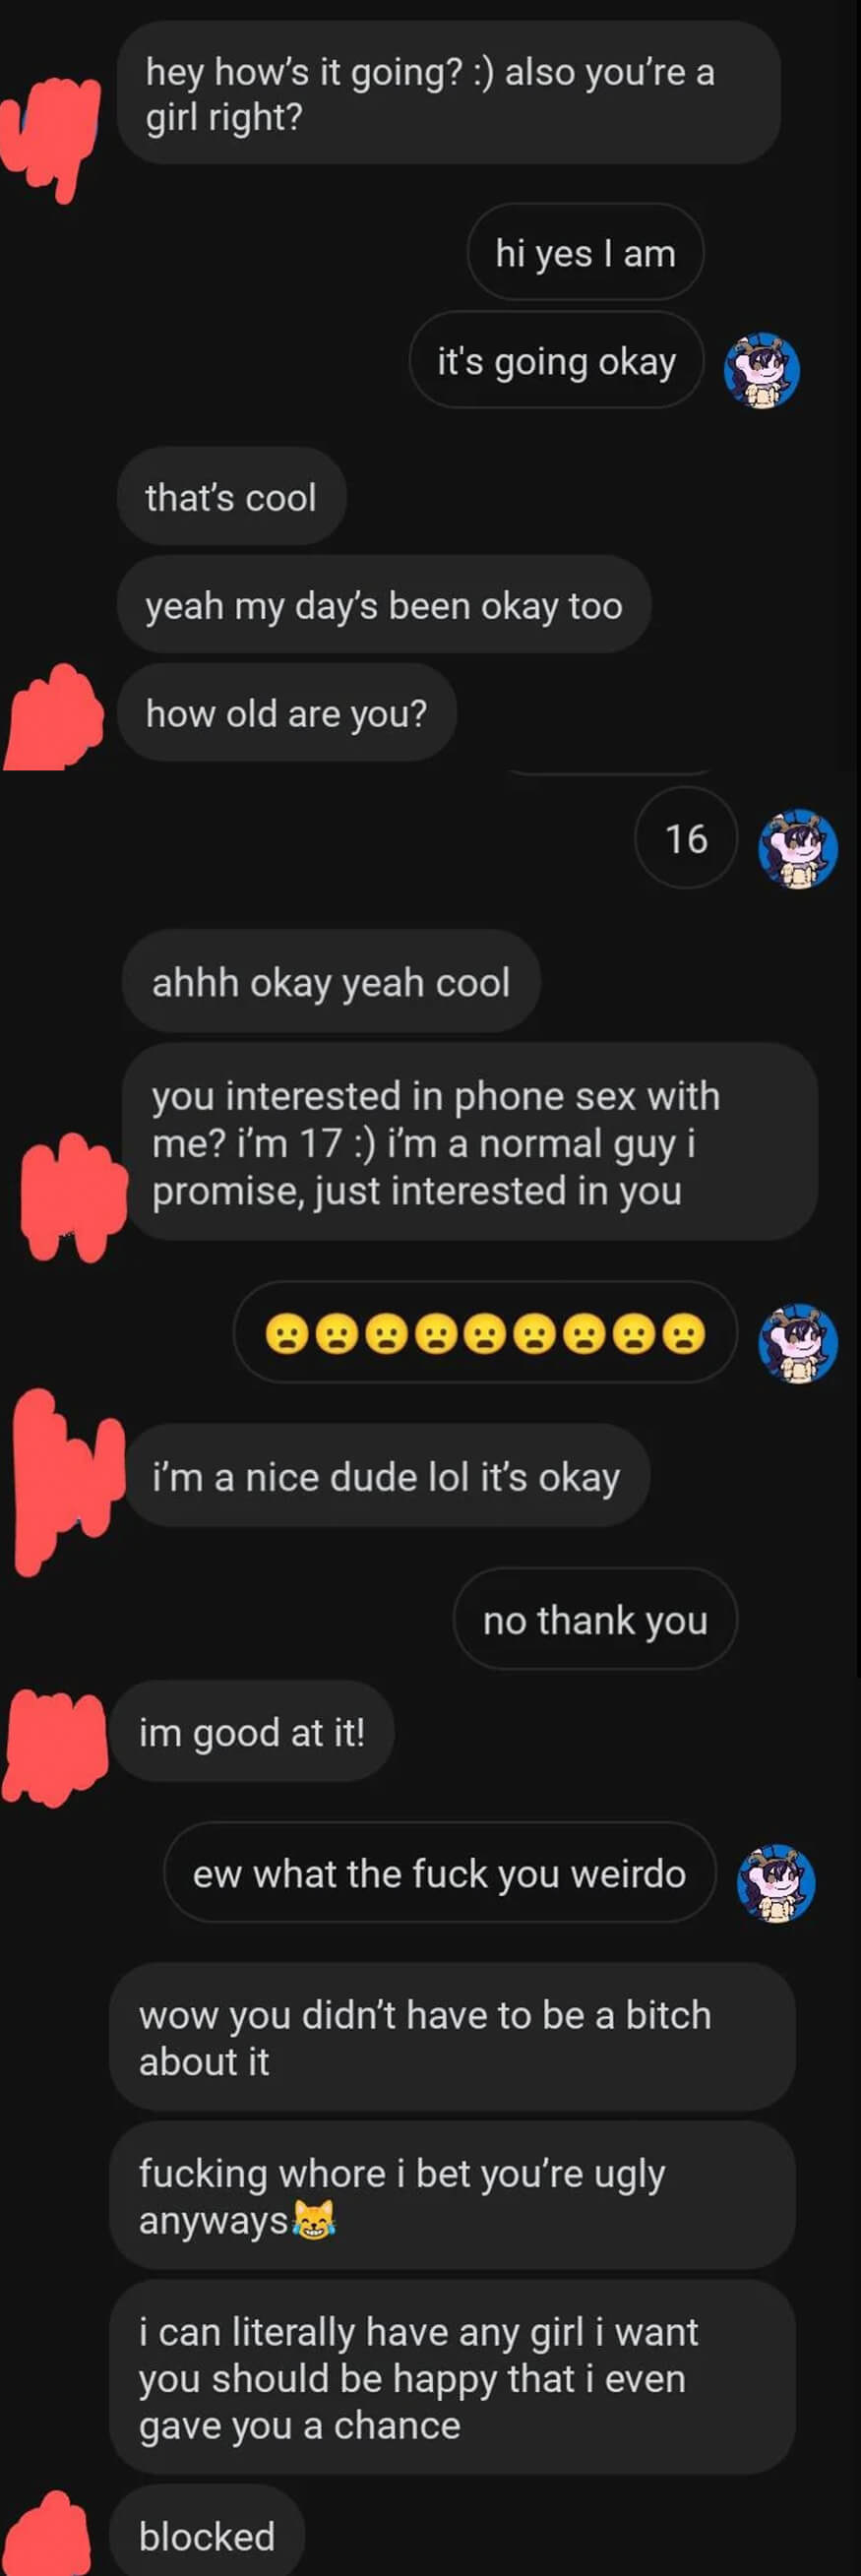 guy on reddit says hi to a girl and asks her age — she says 16 and he says he&#x27;s 17 then asks for phone sex, saying he&#x27;s good at it. she says no and he calls her a few swear insults and says she&#x27;s probably ugly